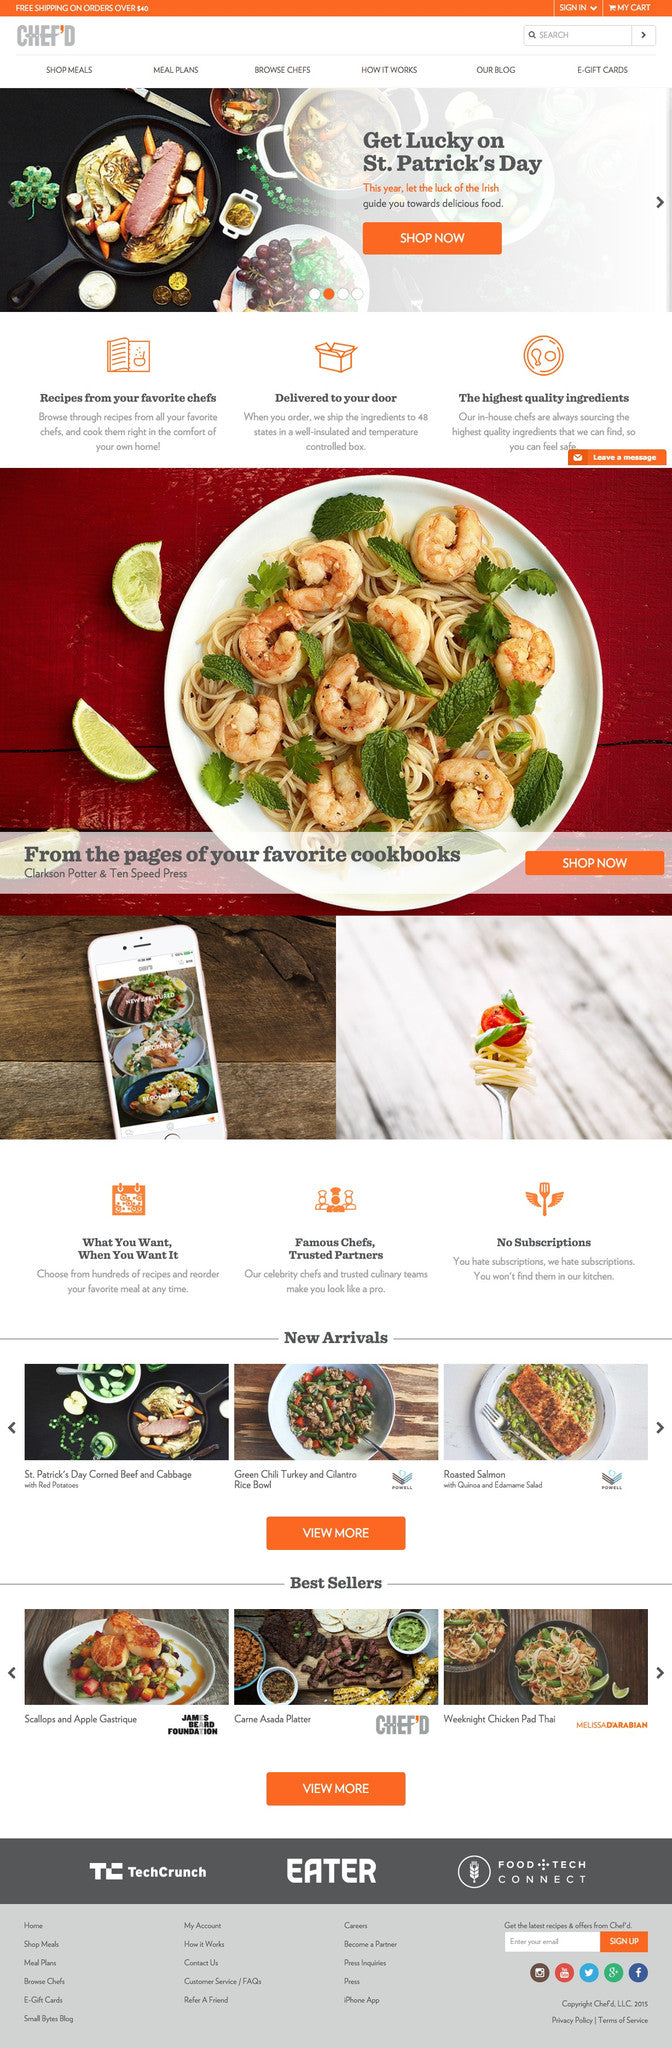 Chef'D - Home Page Design